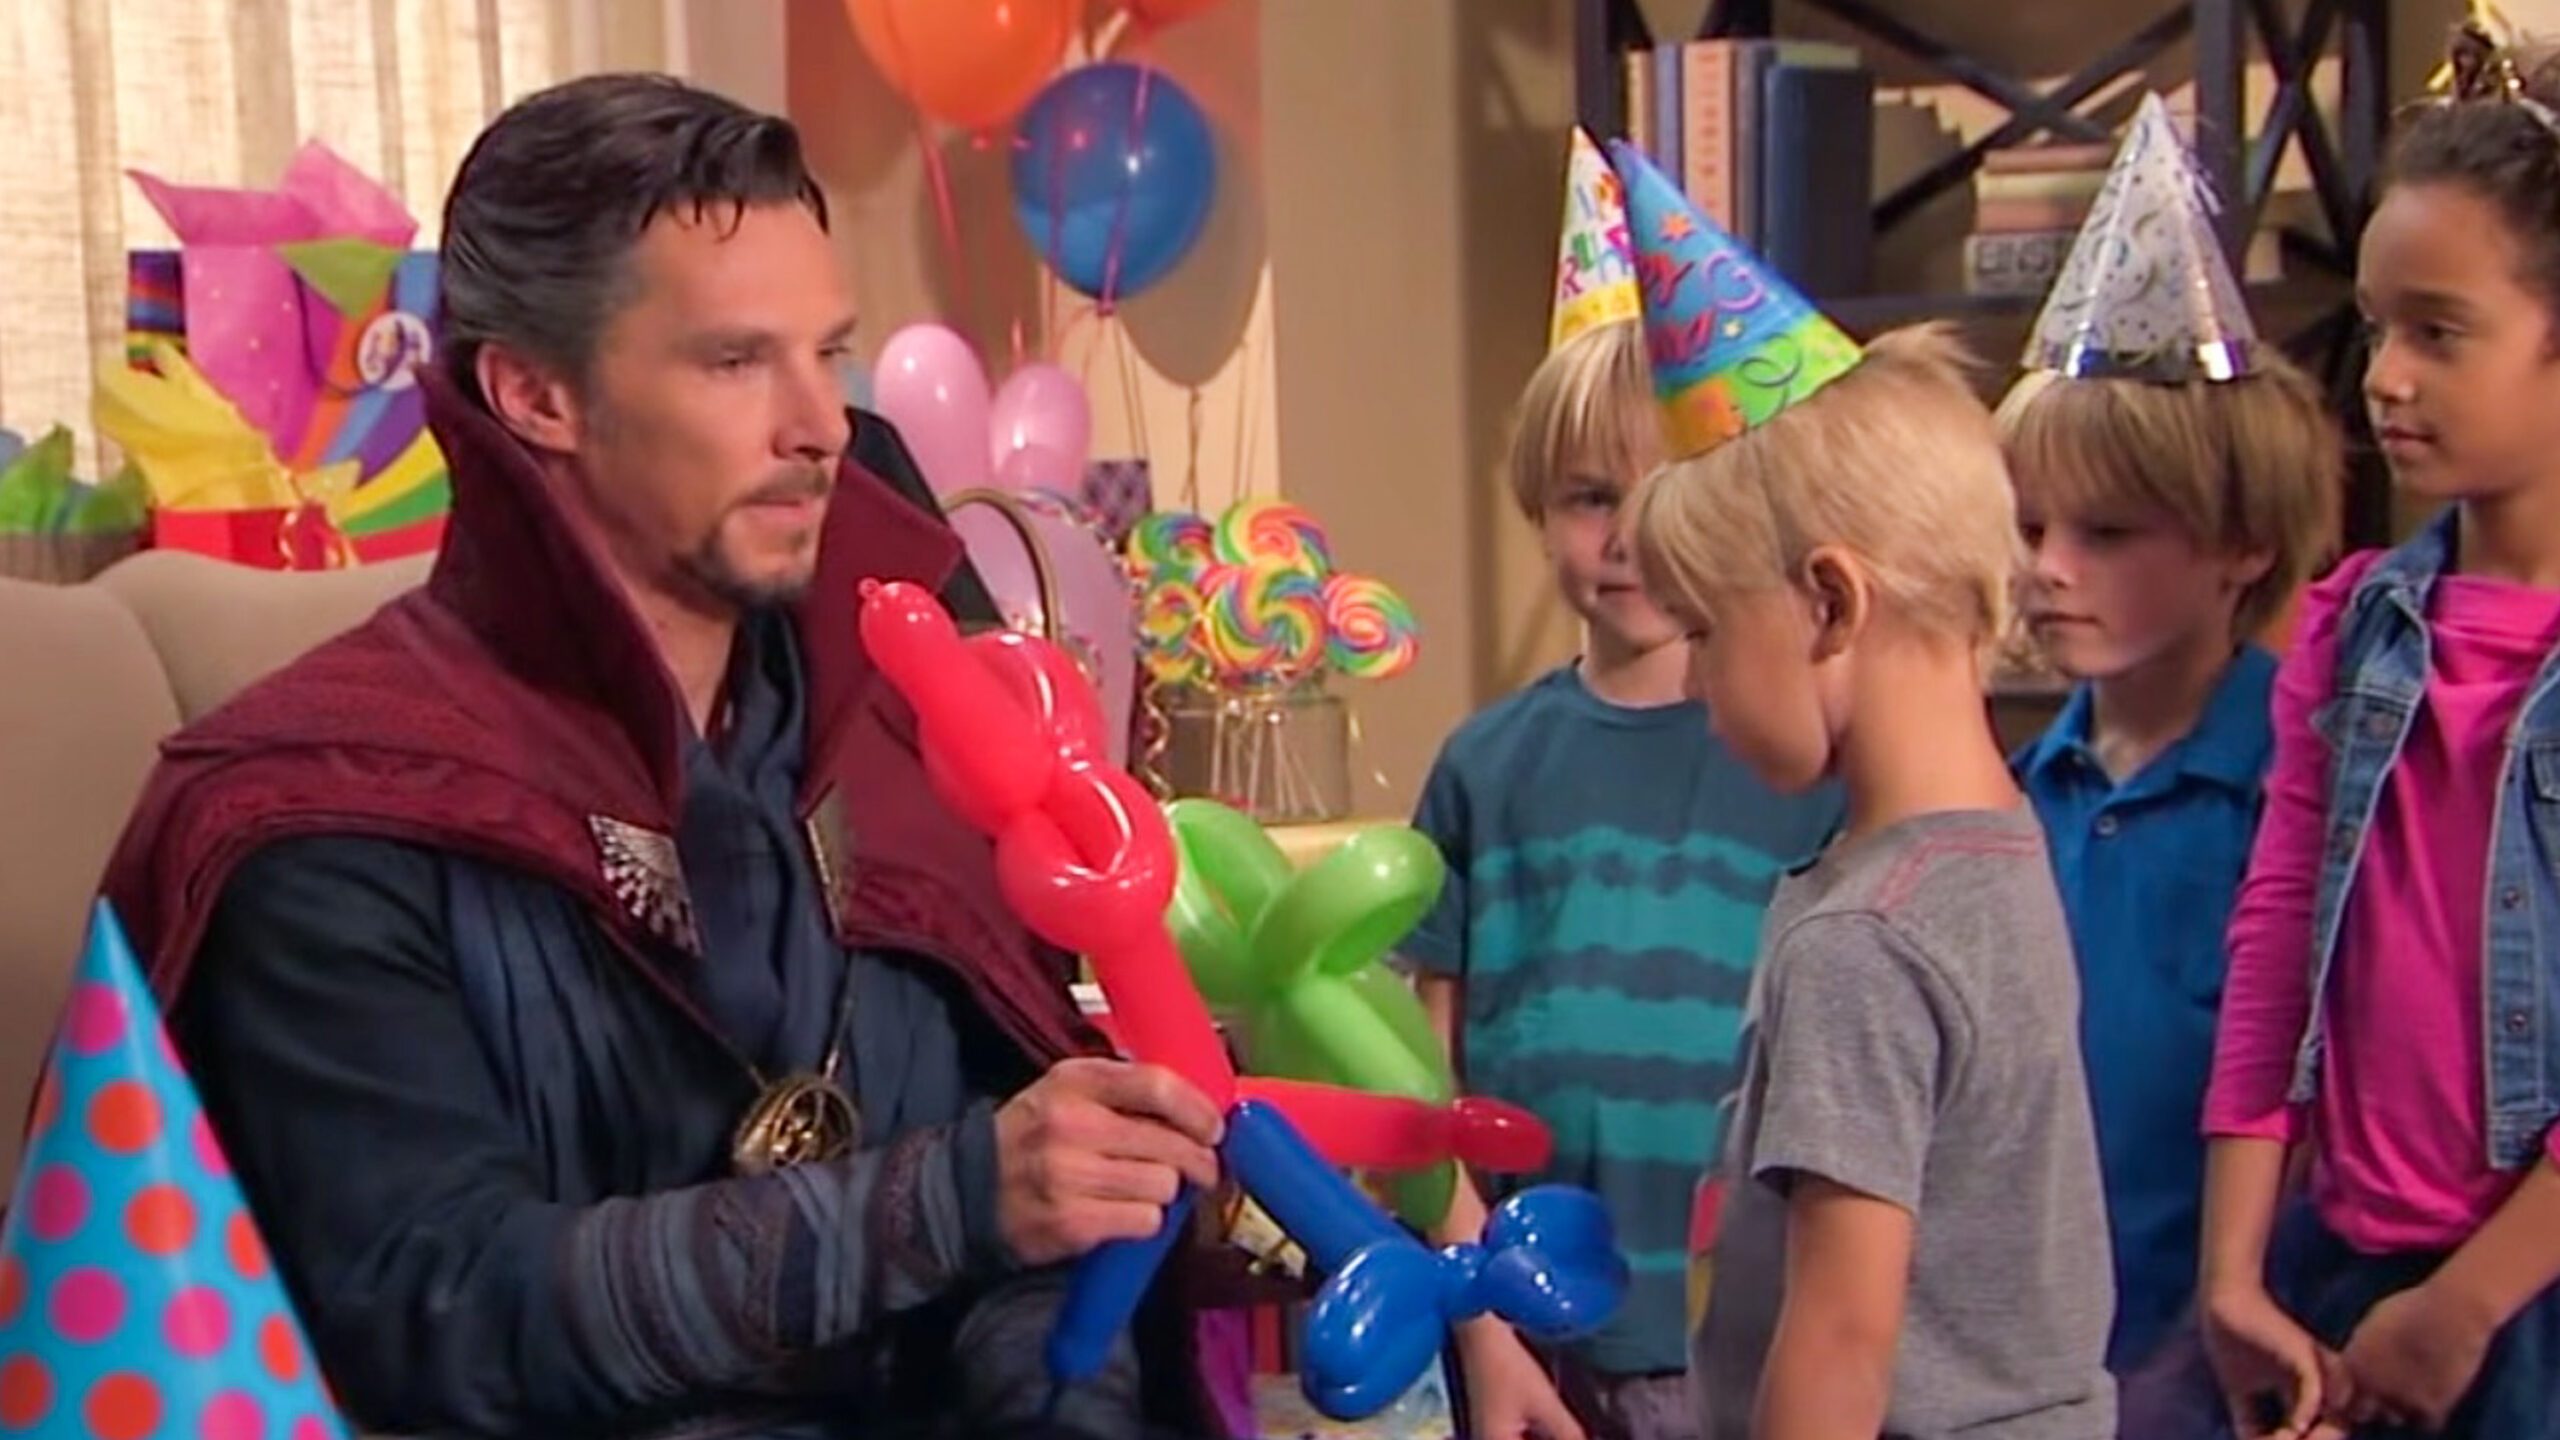 WATCH: How does Doctor Strange fare at a kid’s party?